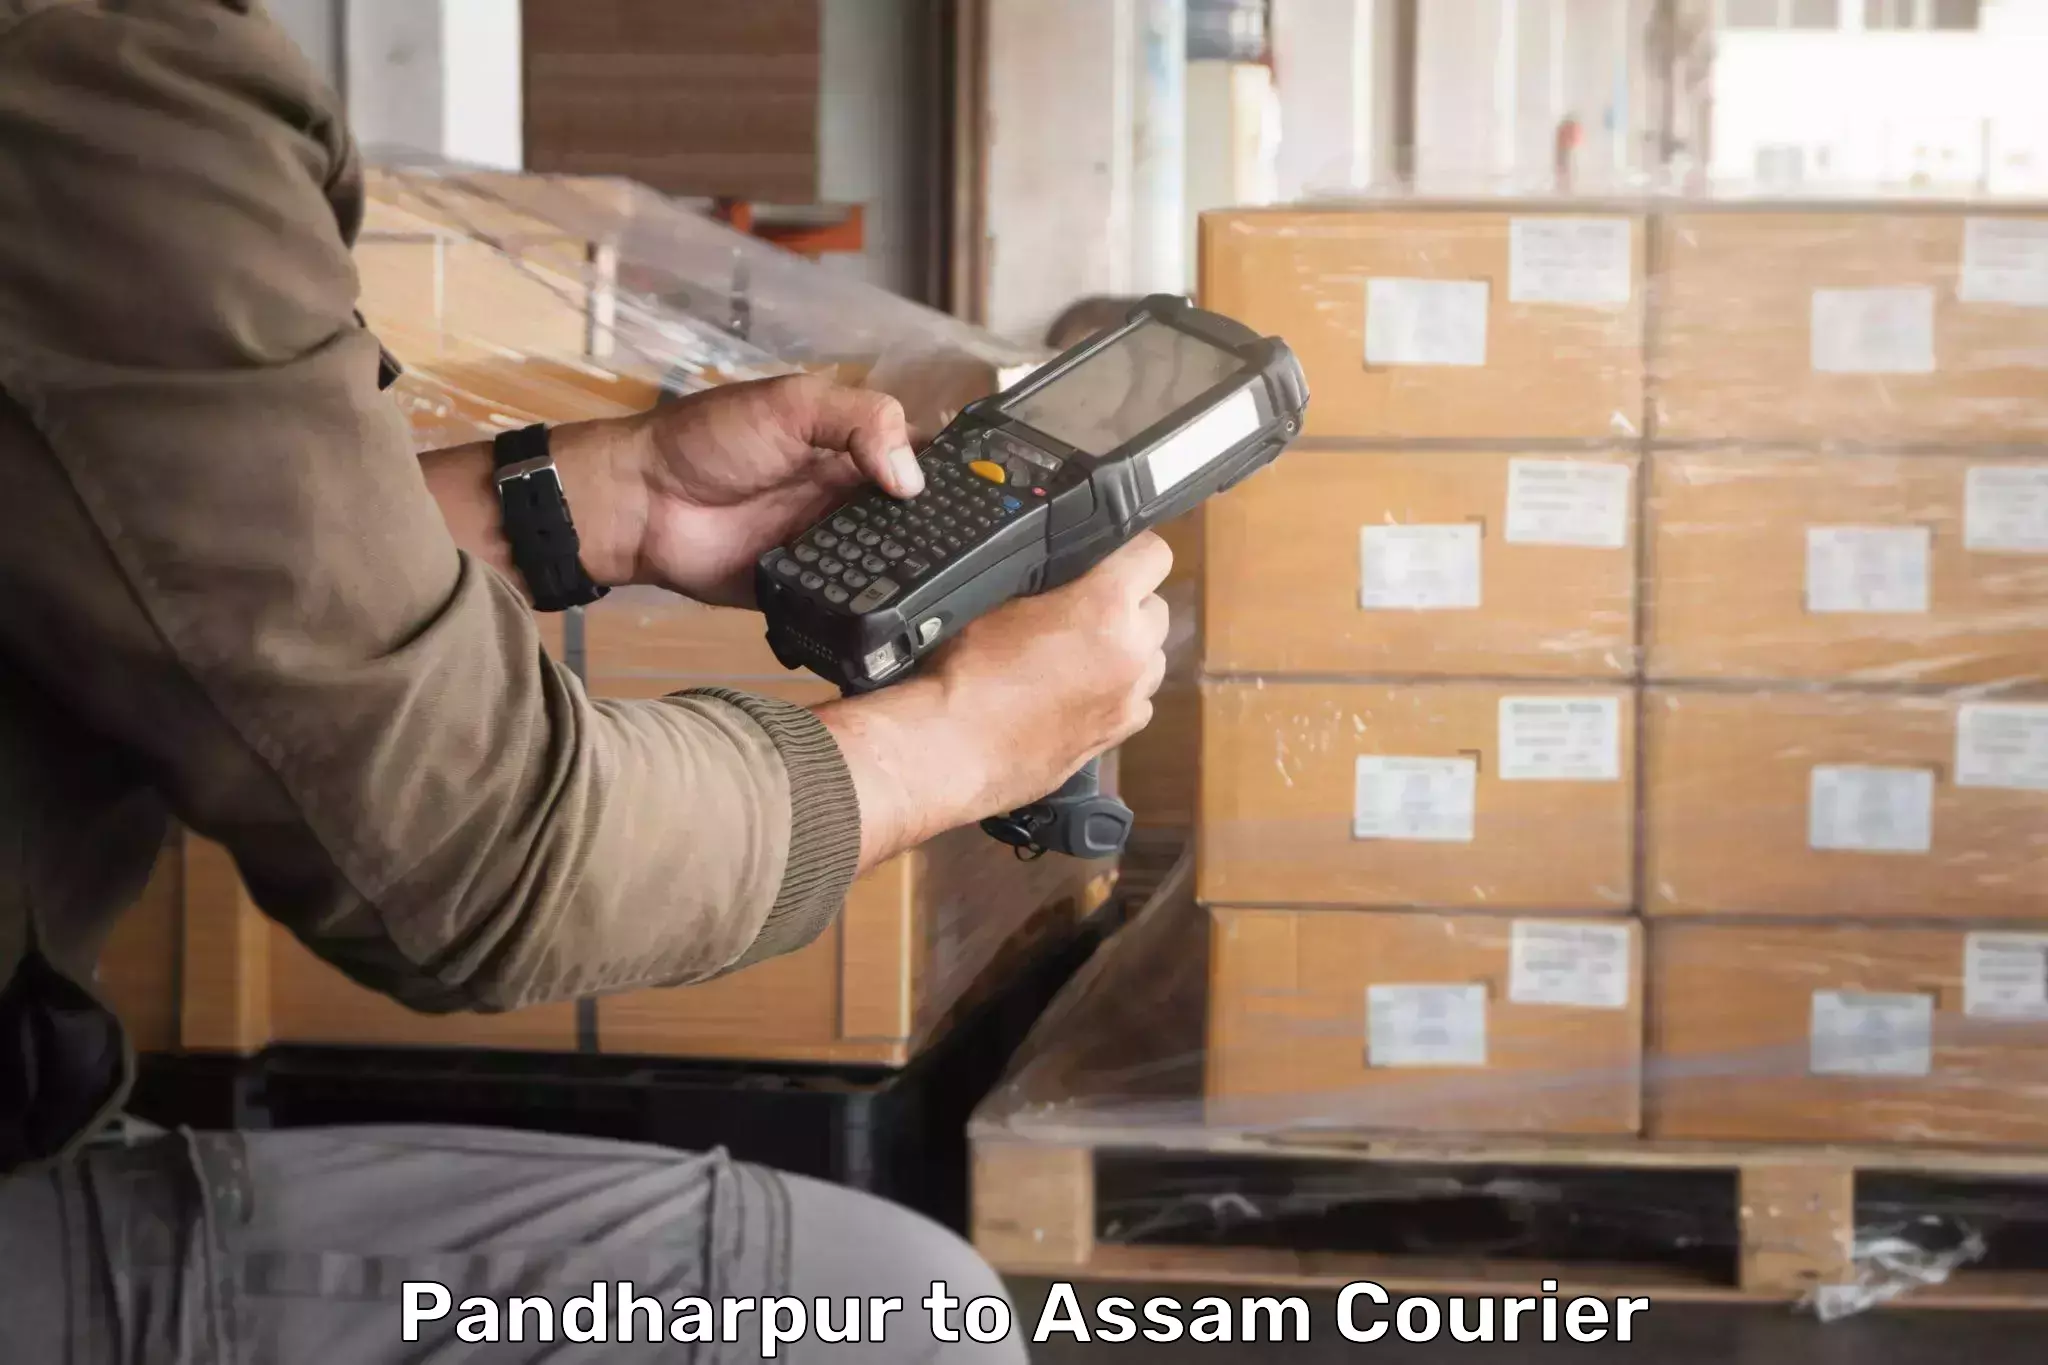 State-of-the-art courier technology Pandharpur to Dibrugarh University